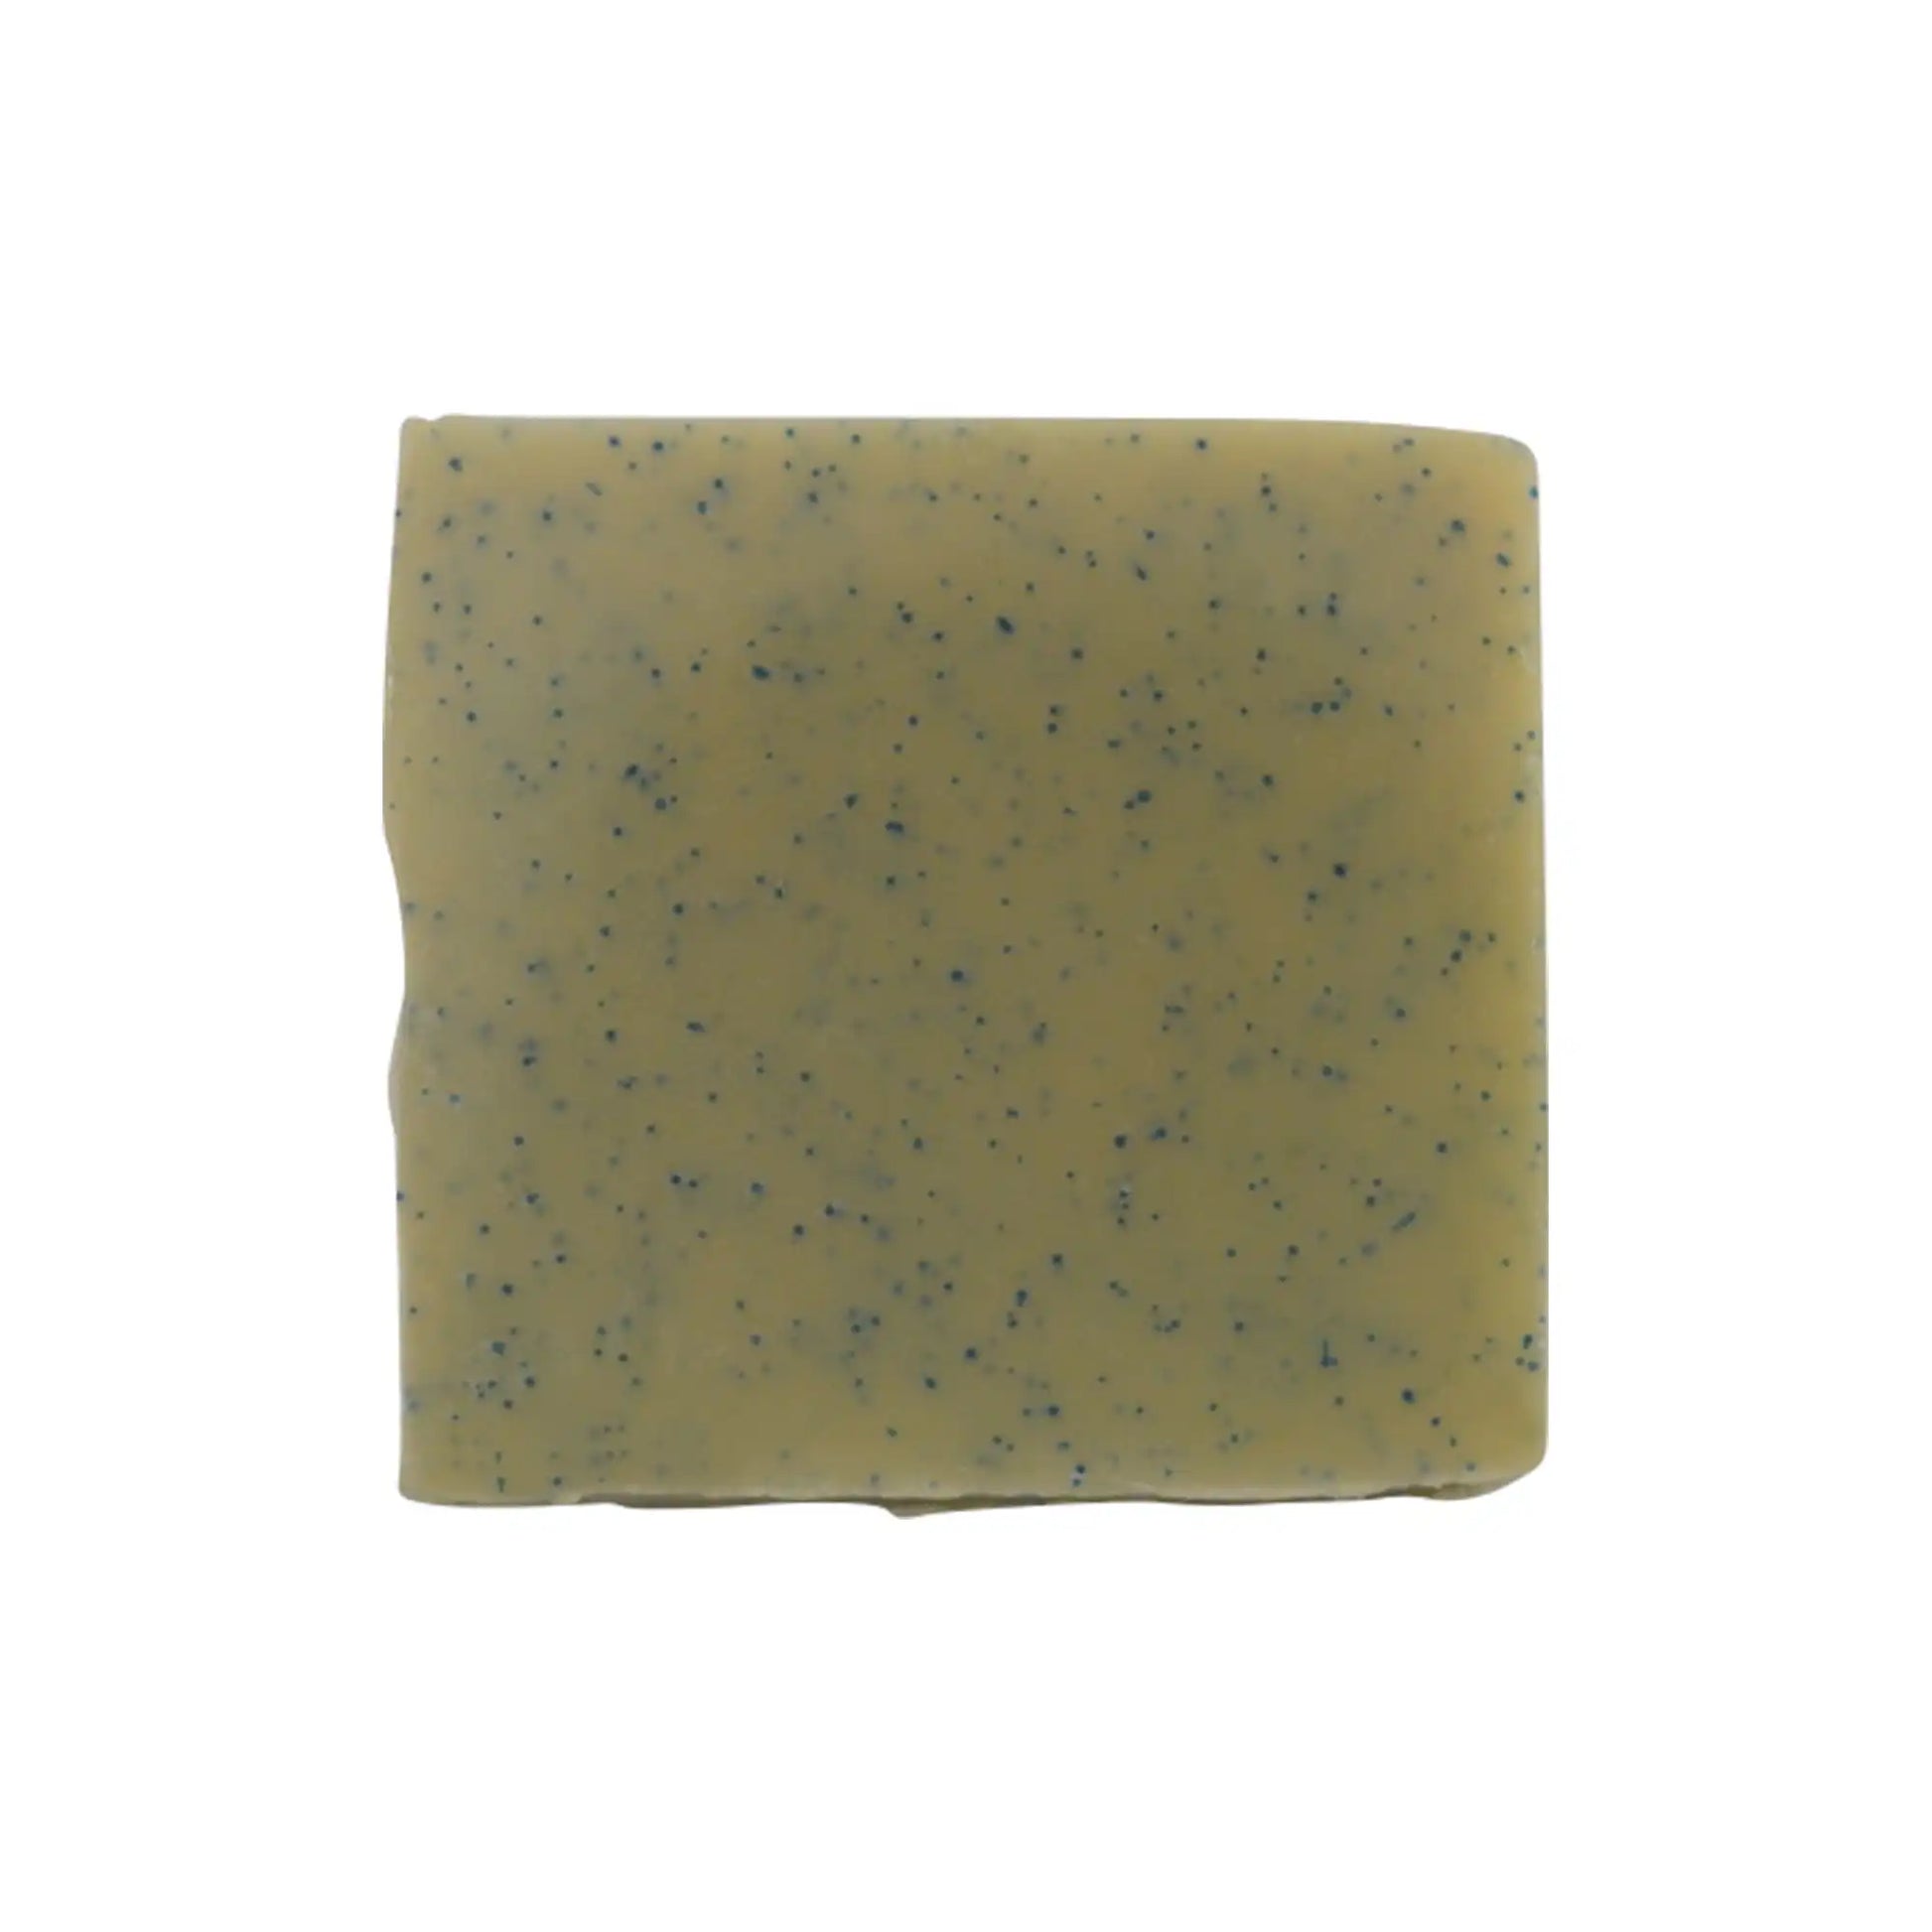 Cruisin Organics Goddess Sunflower Soap. With gentle sunflower wax beads and vitamin E, this soap prevents signs of aging for a soft and radiant complexion. Made with natural oils and shea butter, and enriched with farm-fresh goat milk, it's a luxurious addition to your skincare routine.